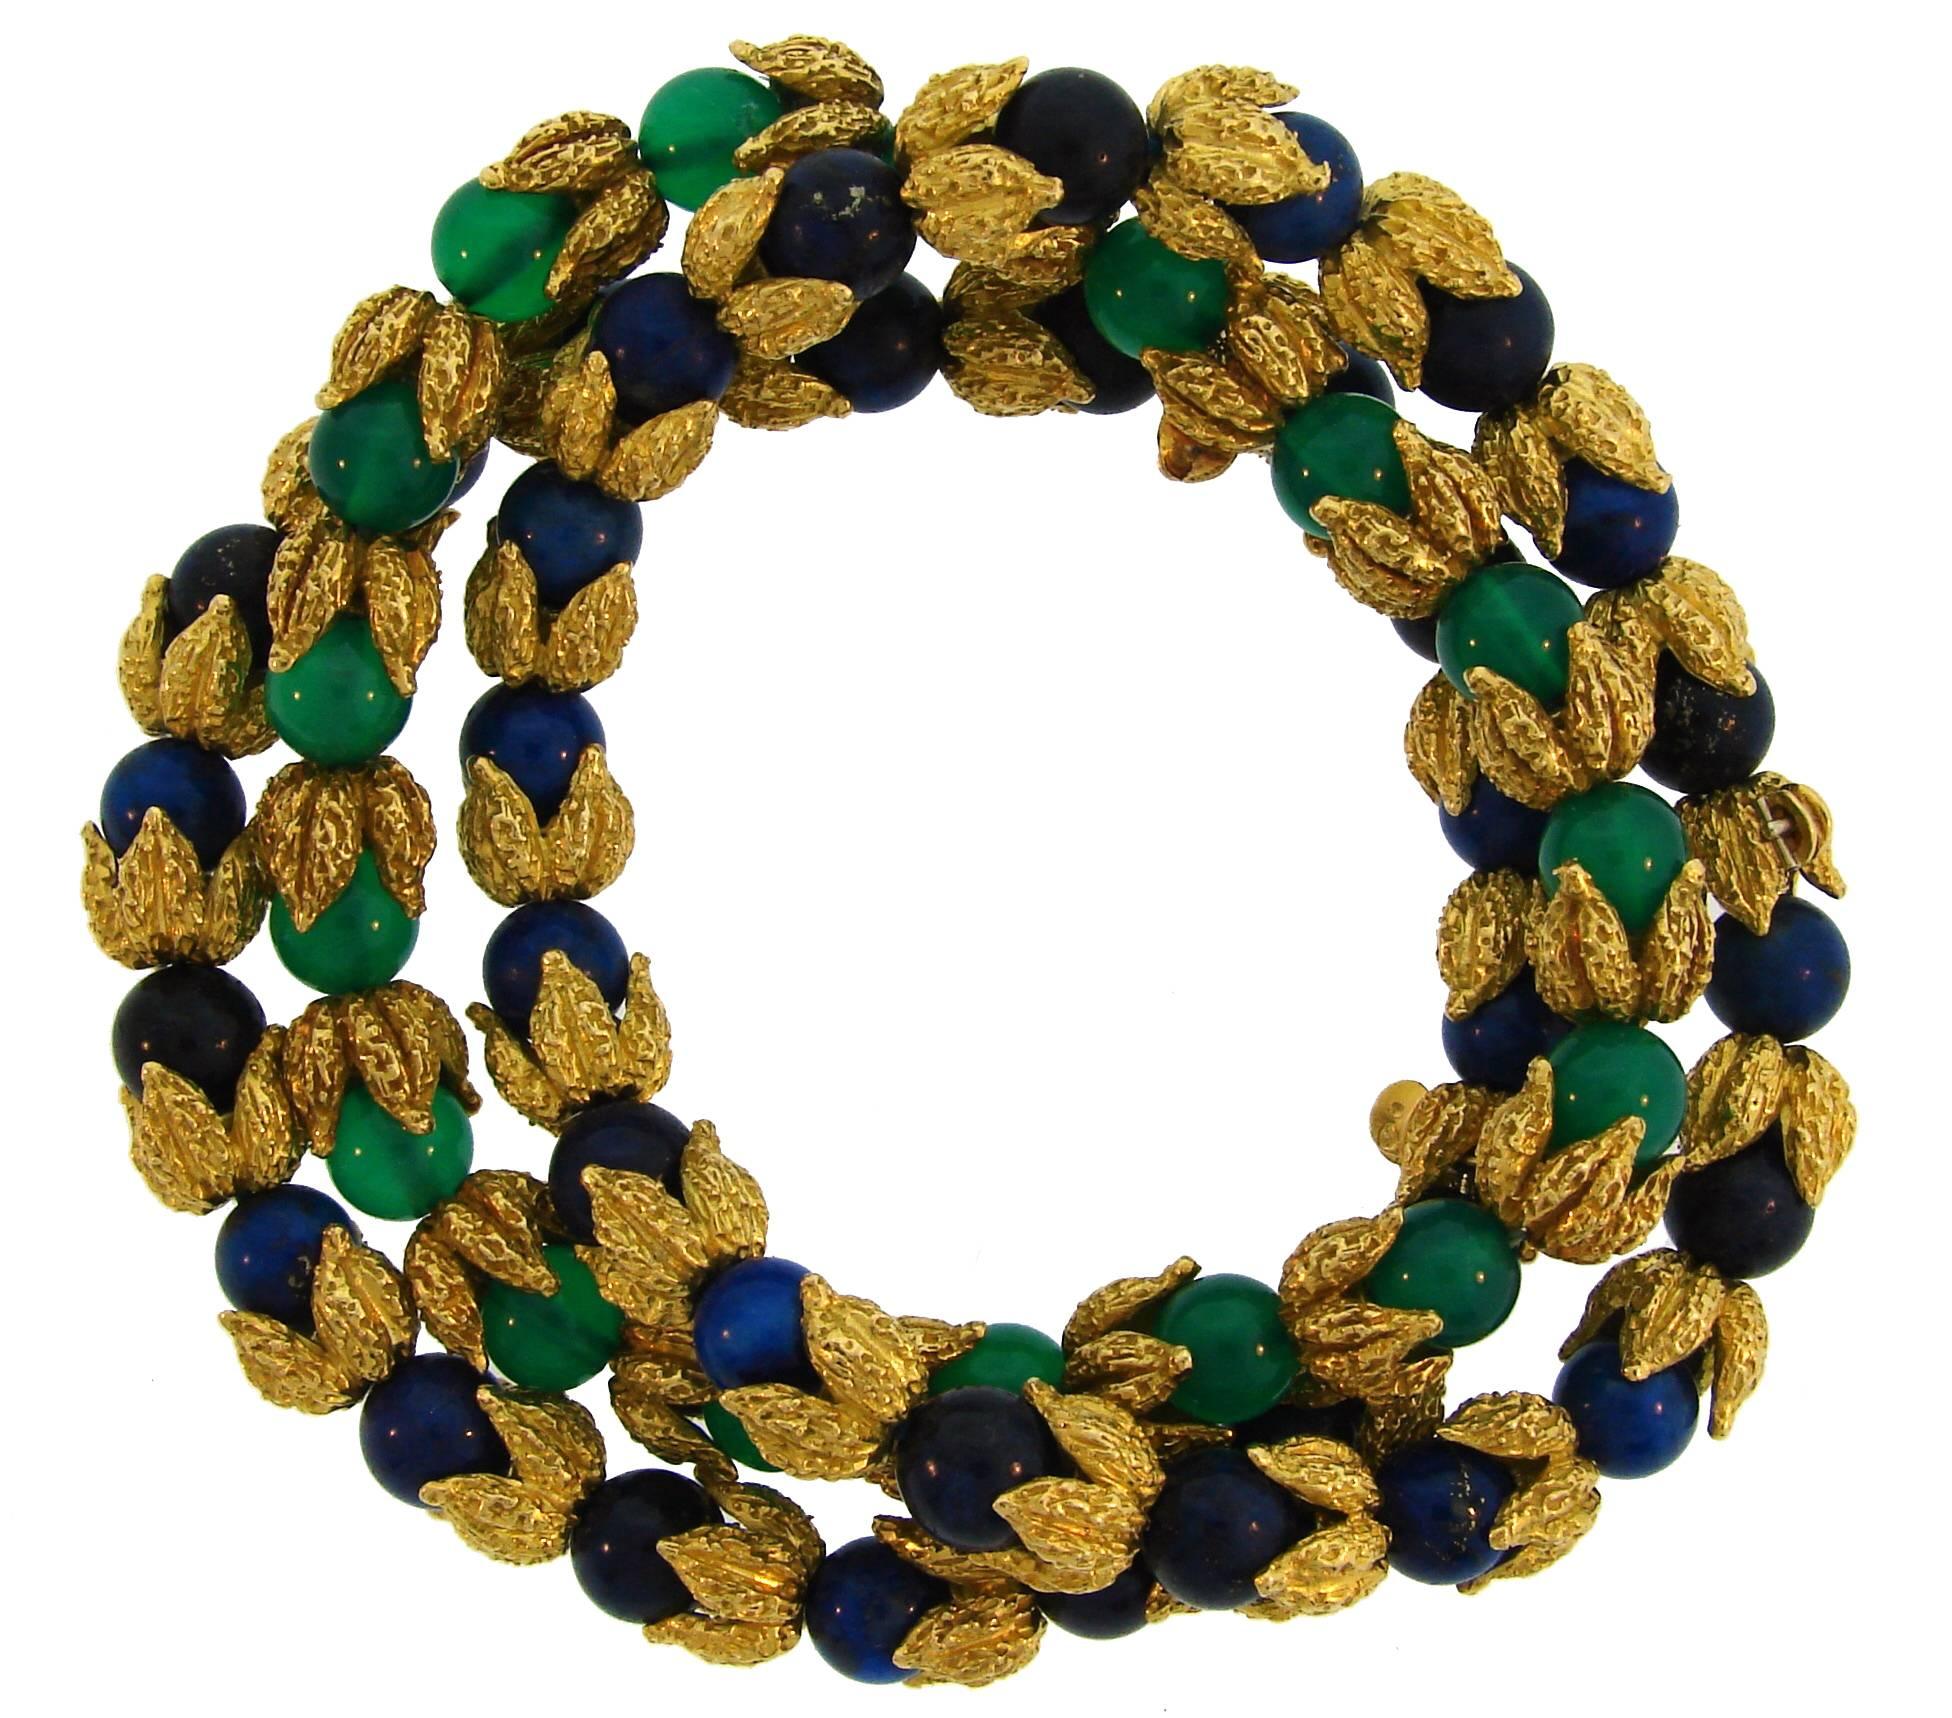 Chic and colorful trio of bracelets created in France in the 1970's. Wearable and fun, they are a great addition to your jewelry collection. 
Two bracelets are made of 18 karat yellow gold and sodalite and one is made of 18 karat yellow gold and